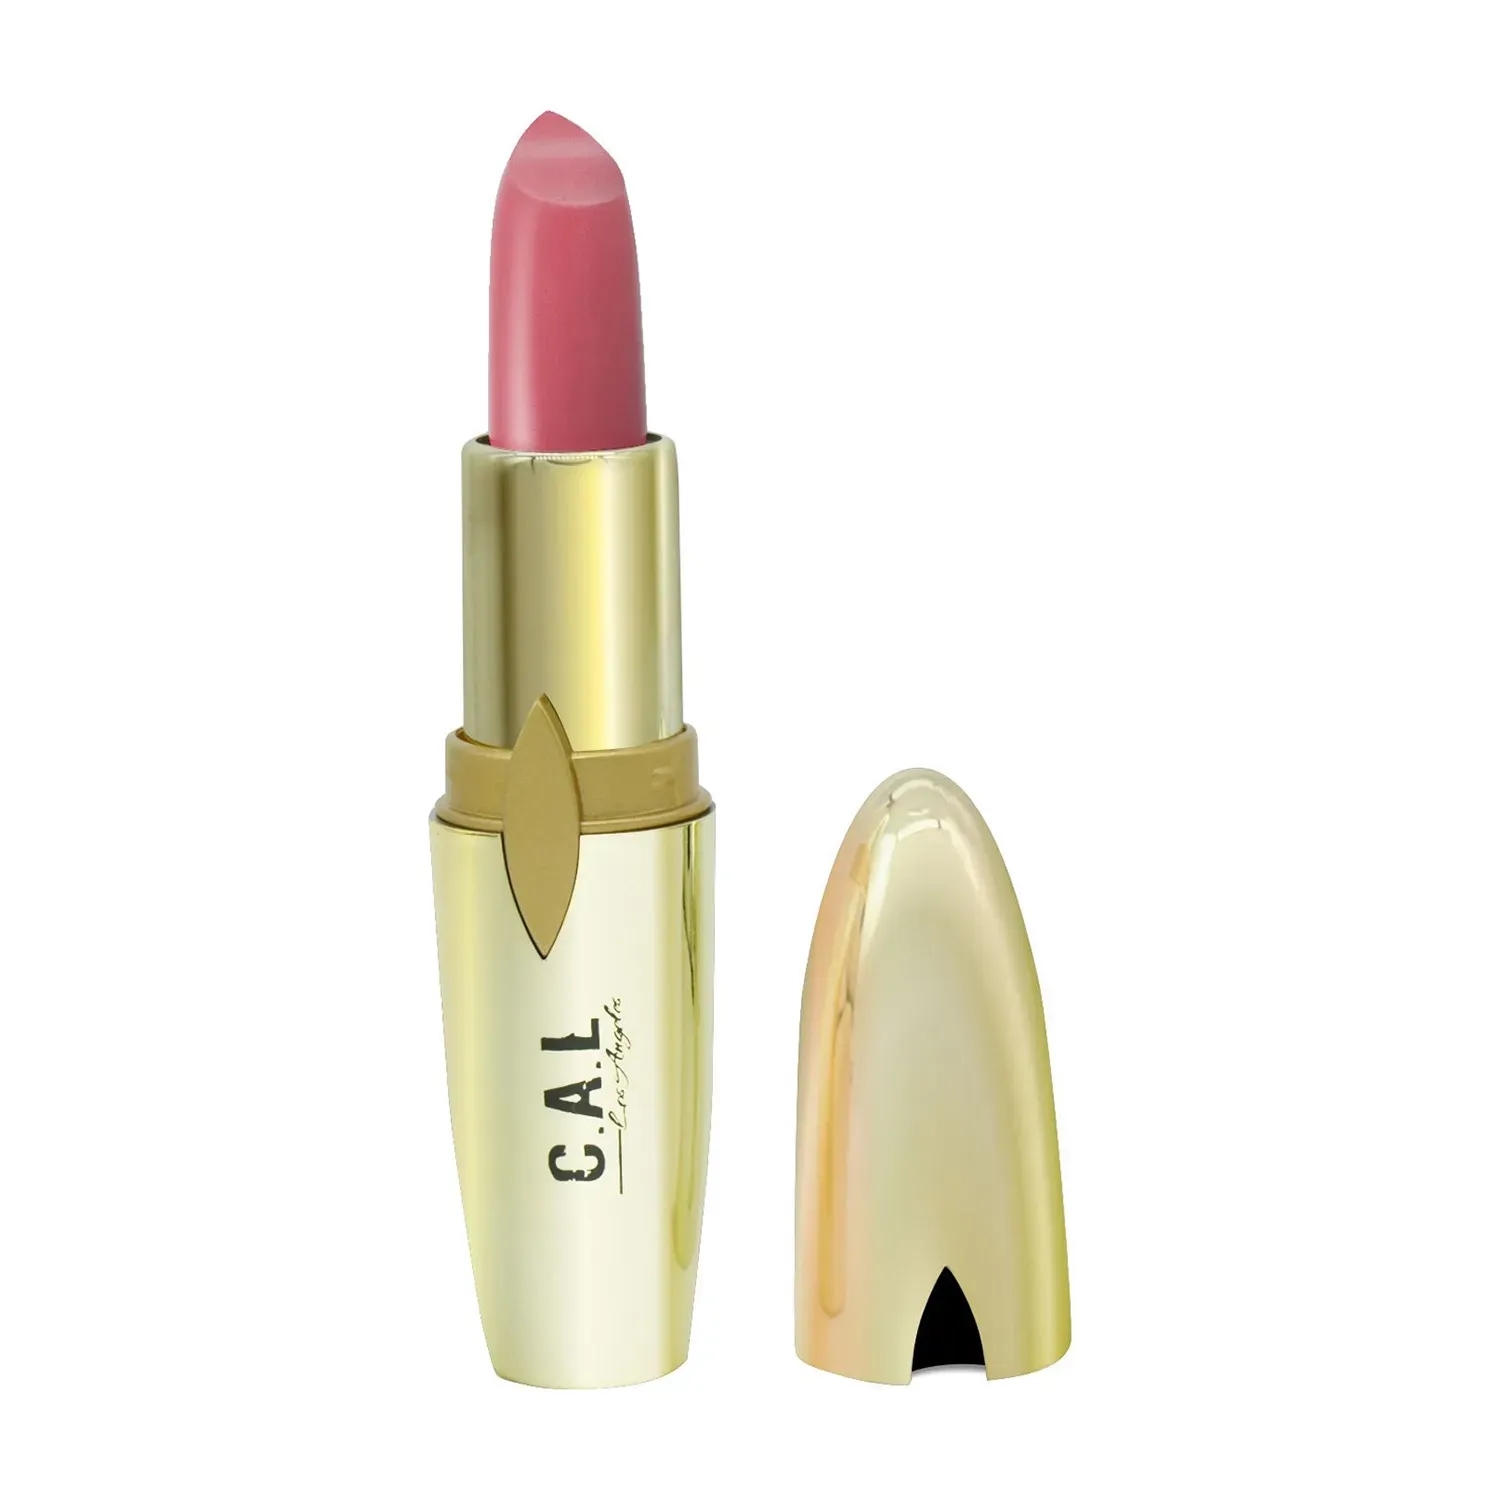 C.A.L Los Angeles Whipped Berries Perfect Pout Lipstick - Whipped Berries (15g)